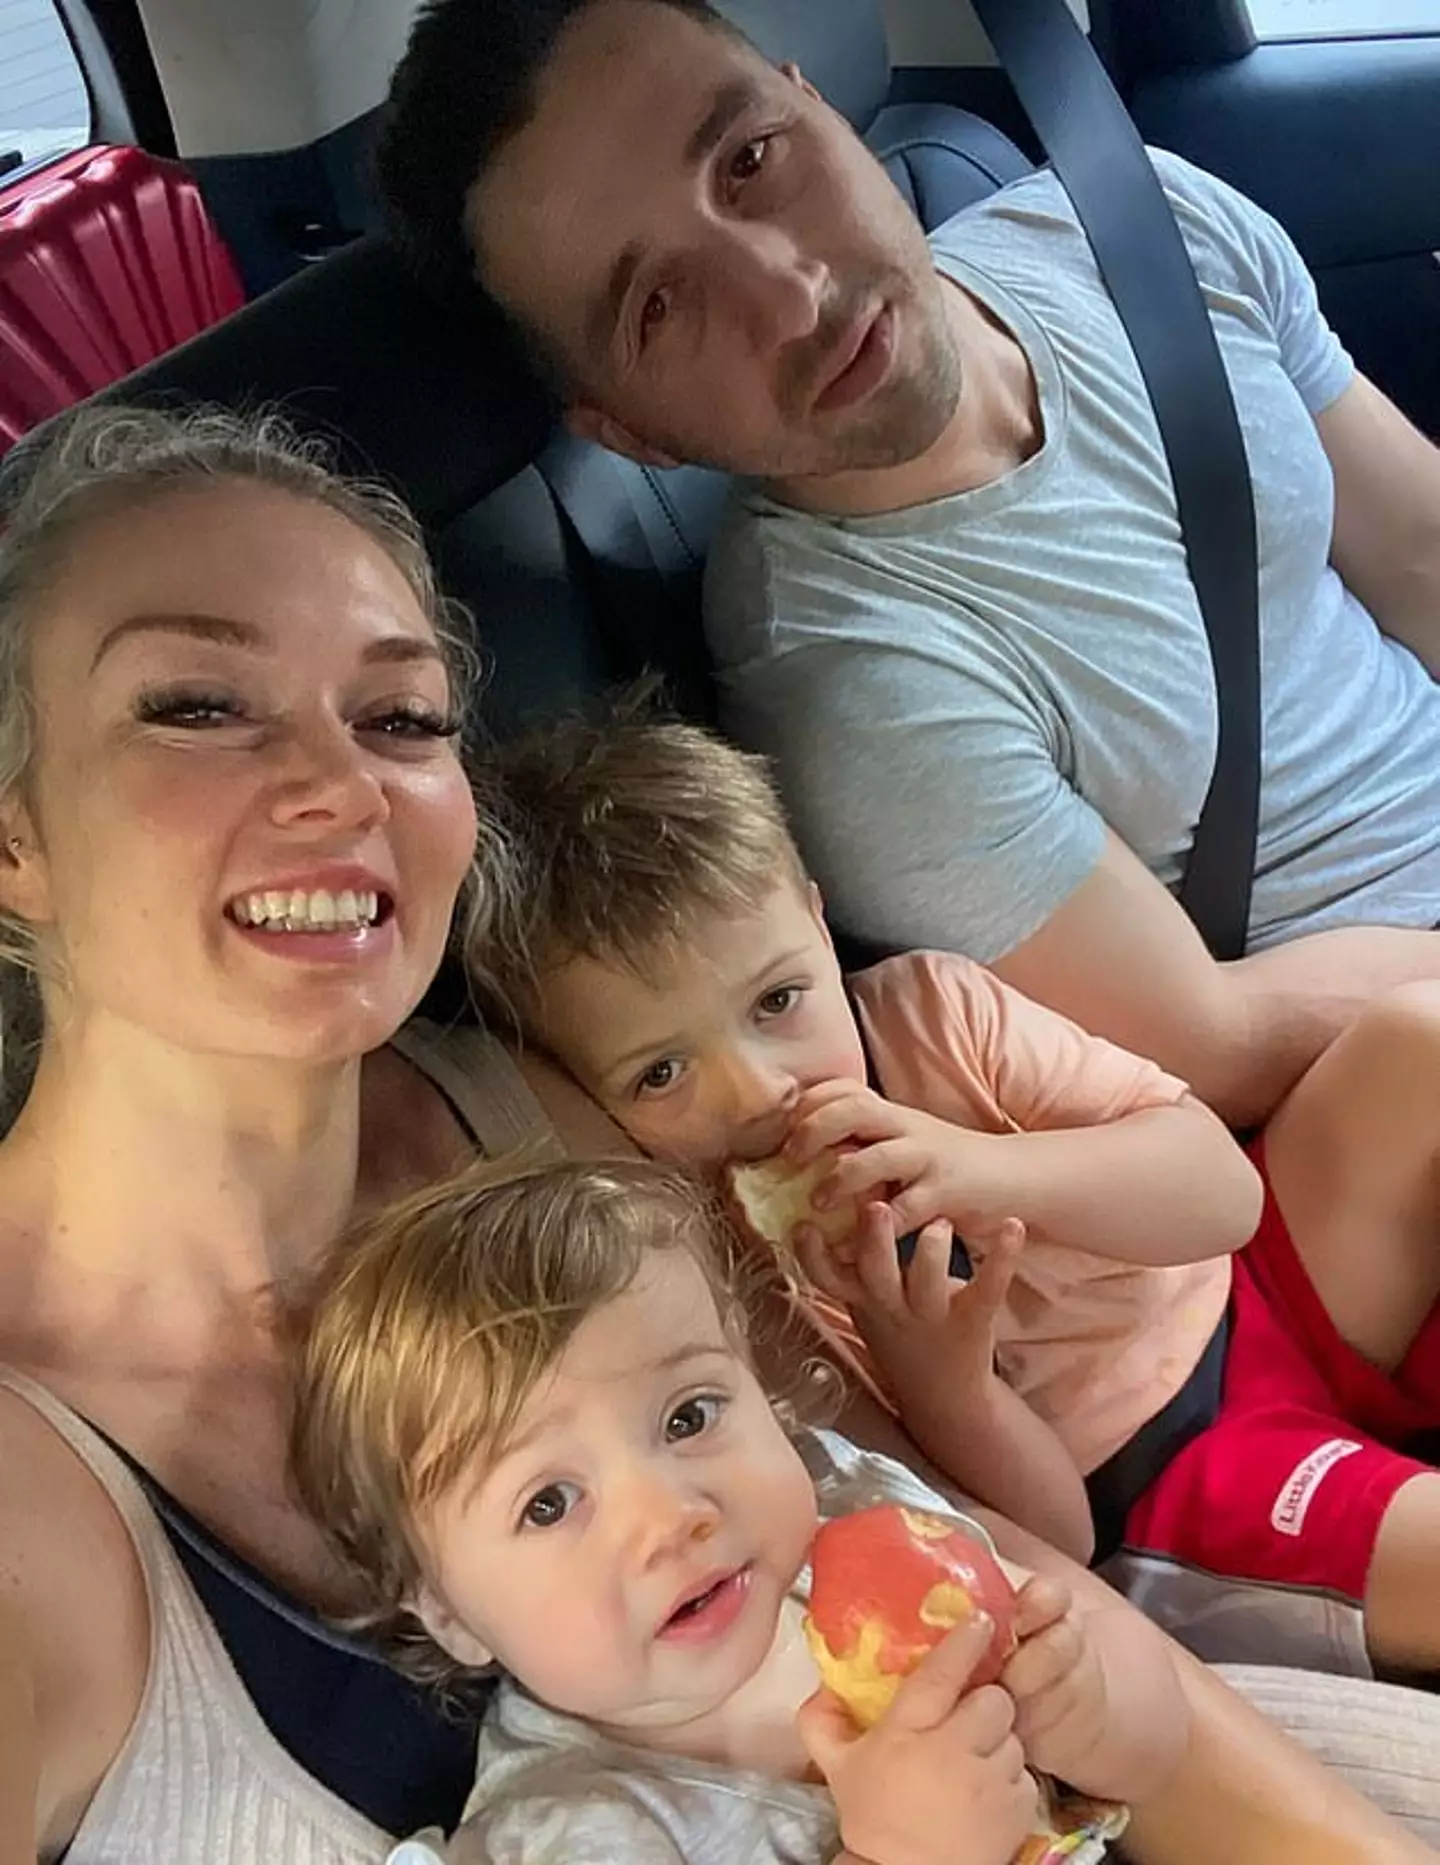 The British passenger, that runs a hair salon in Australia, says she was sat with her one-year-old Harper, who was sleeping in a bassinet, while her partner Henry Trier, 32, was sat with their son Hugo, three, a few rows behind them.